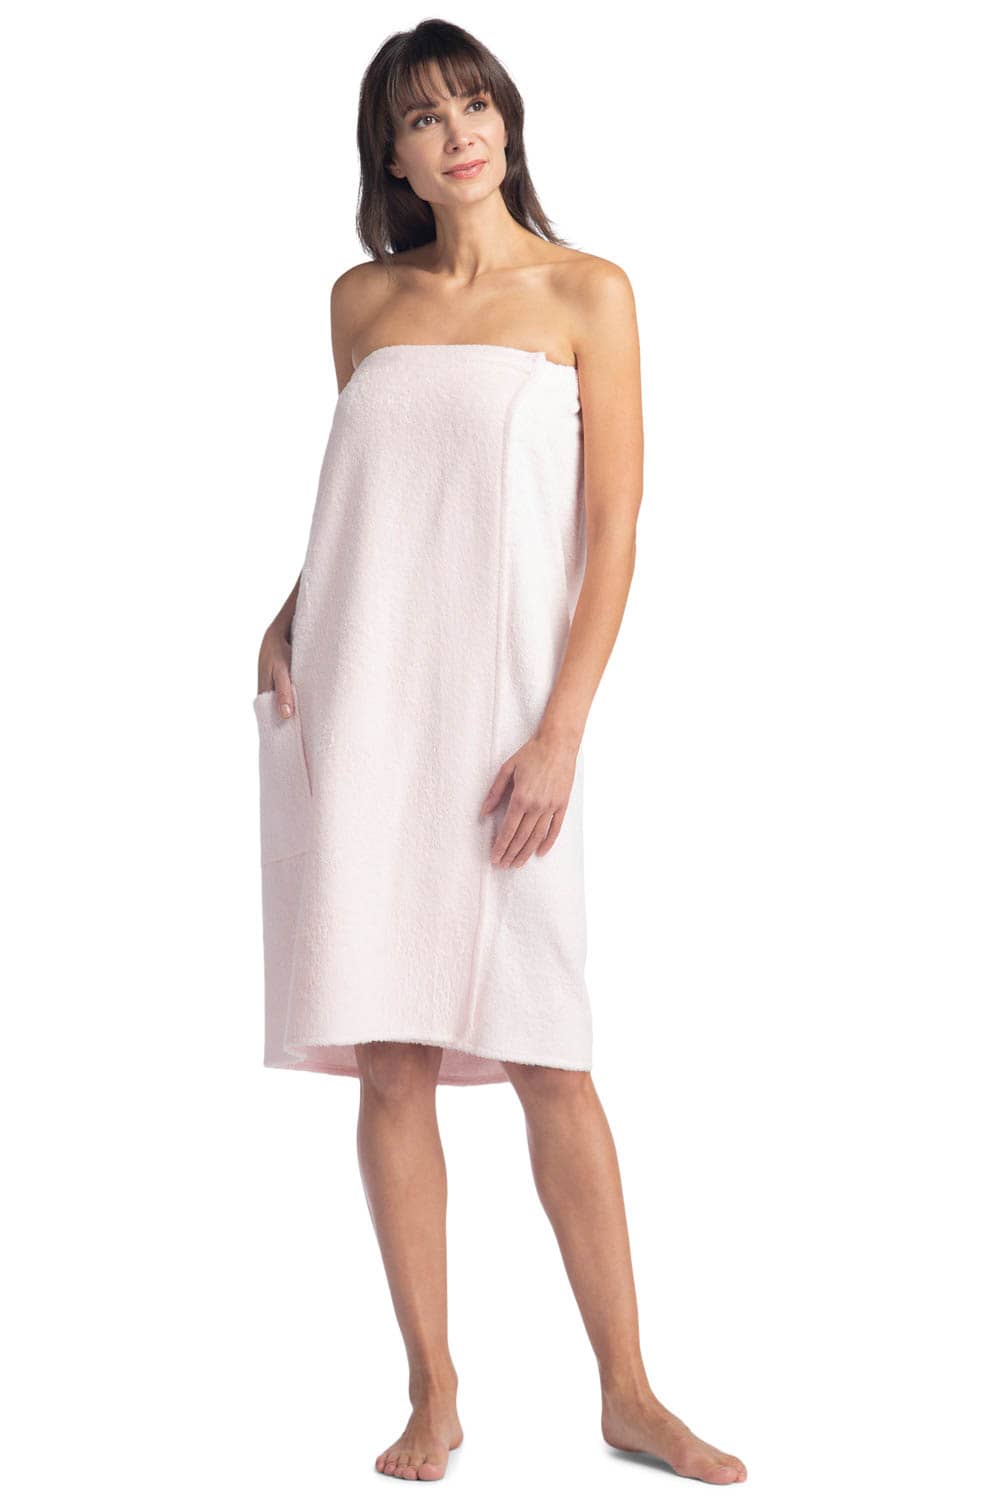 Women's Resort Style Terry Cloth Spa Wrap Womens>Spa>Wrap Fishers Finery 